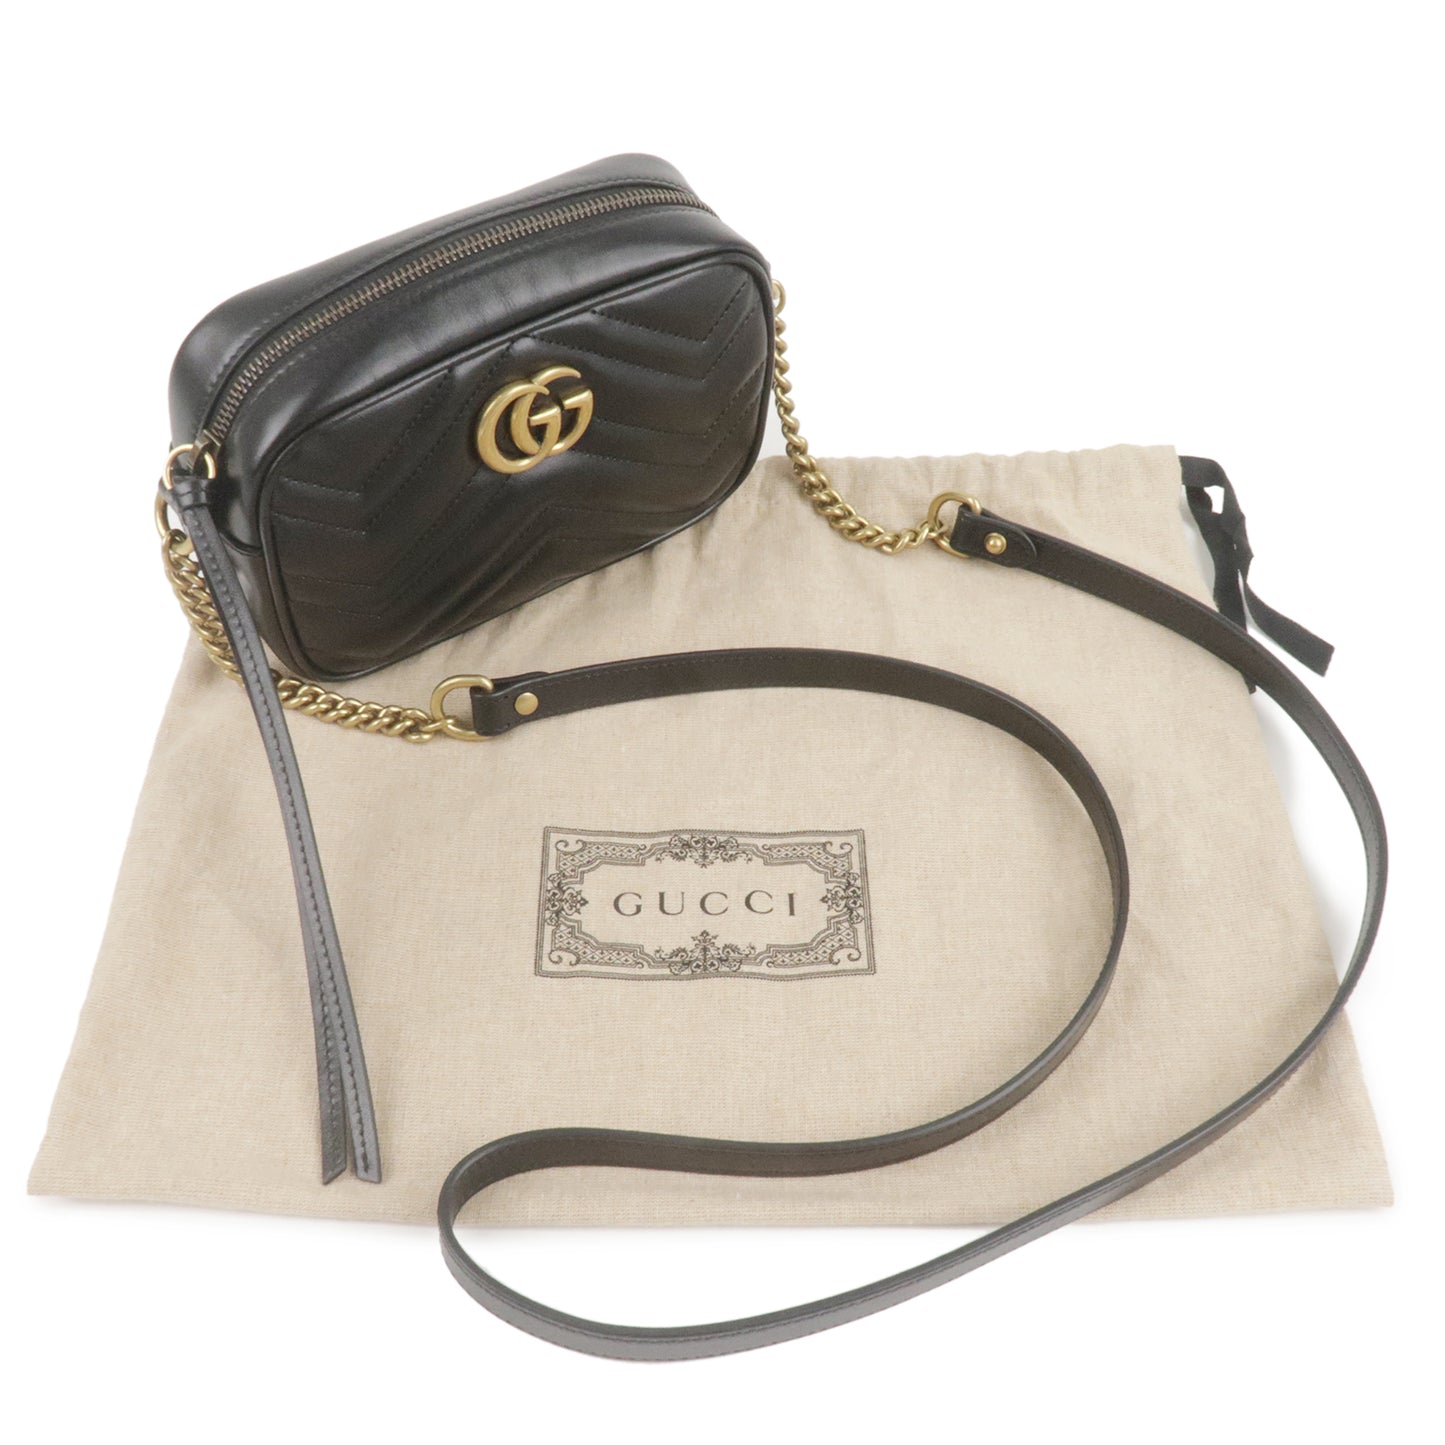 Authentic GUCCI GG Marmont Leather Chain Shoulder Bag 448065 Black Used F/S